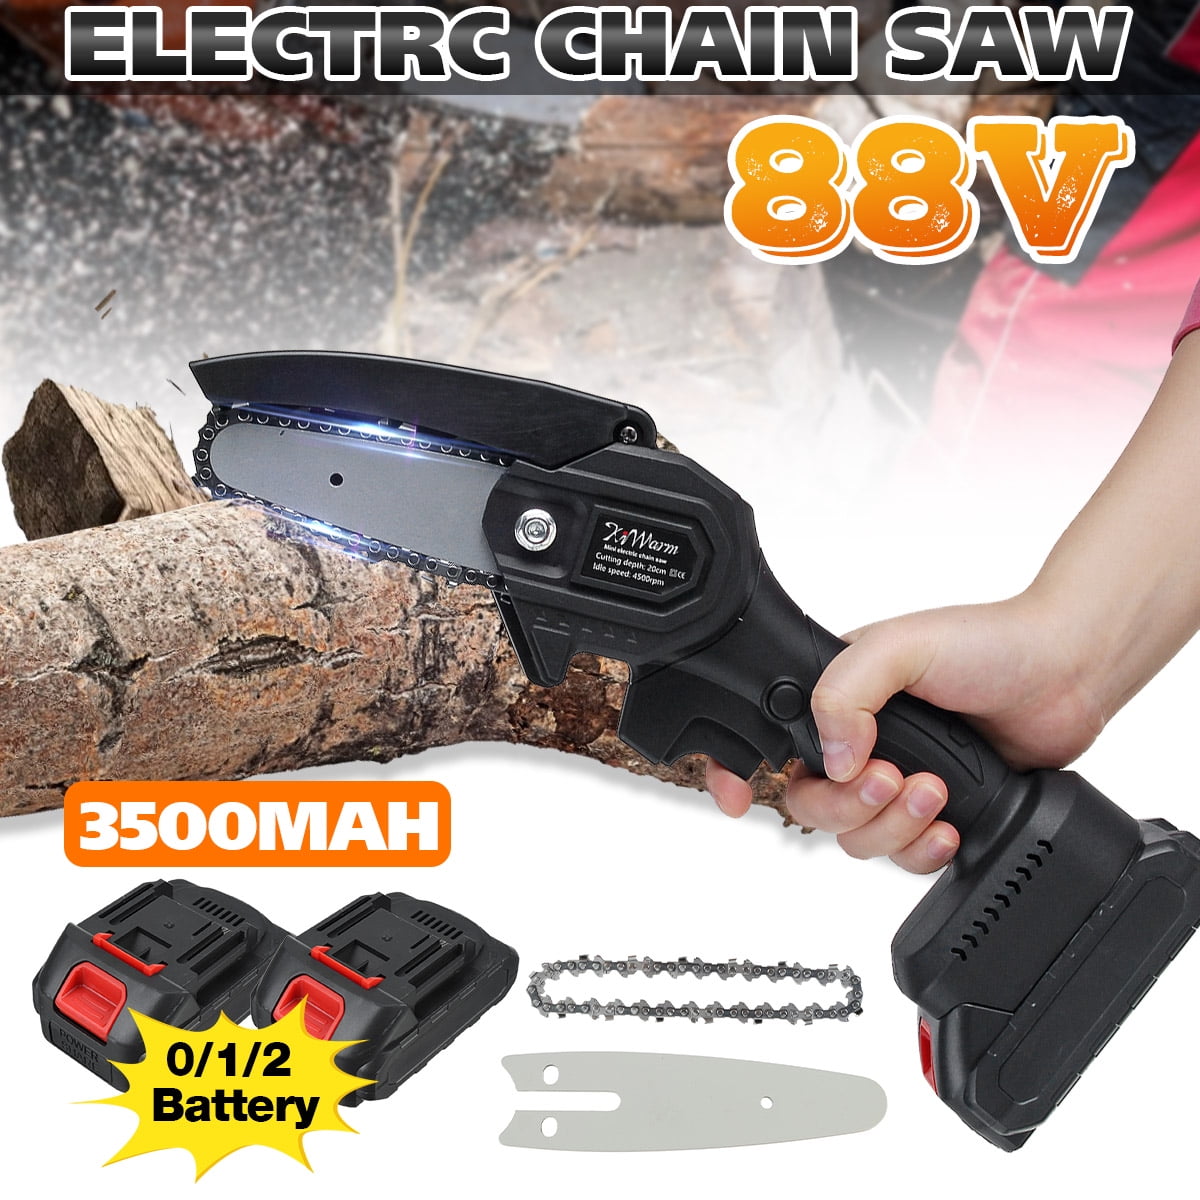 2 Battery Cordless Electric Chain Saw Wood Mini Cutter One-Hand Saw Woodworking 